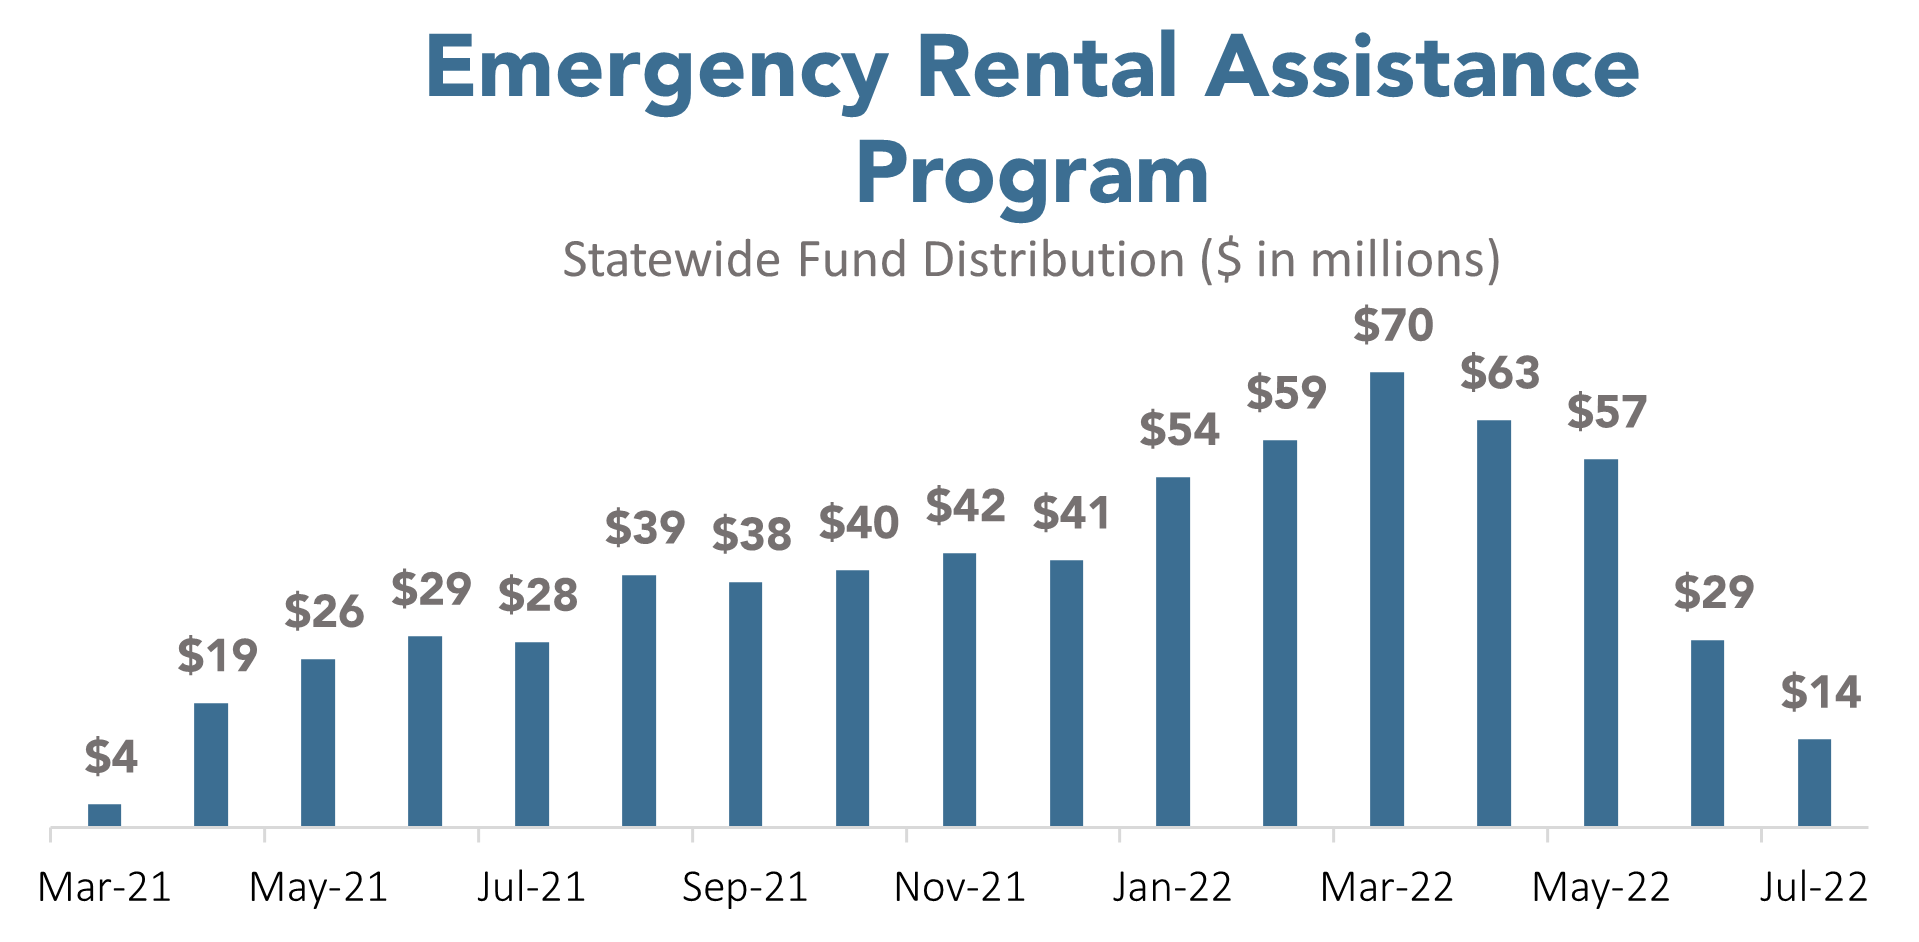 Graph displaying statewide funding distribution for the Emergency Rental Assistance Program from March 2021 to July 2022. The amounts range from $4 million in March 2021, up to a peak of $70 million in March 2022, then falling back down to $14 million by July 2022.